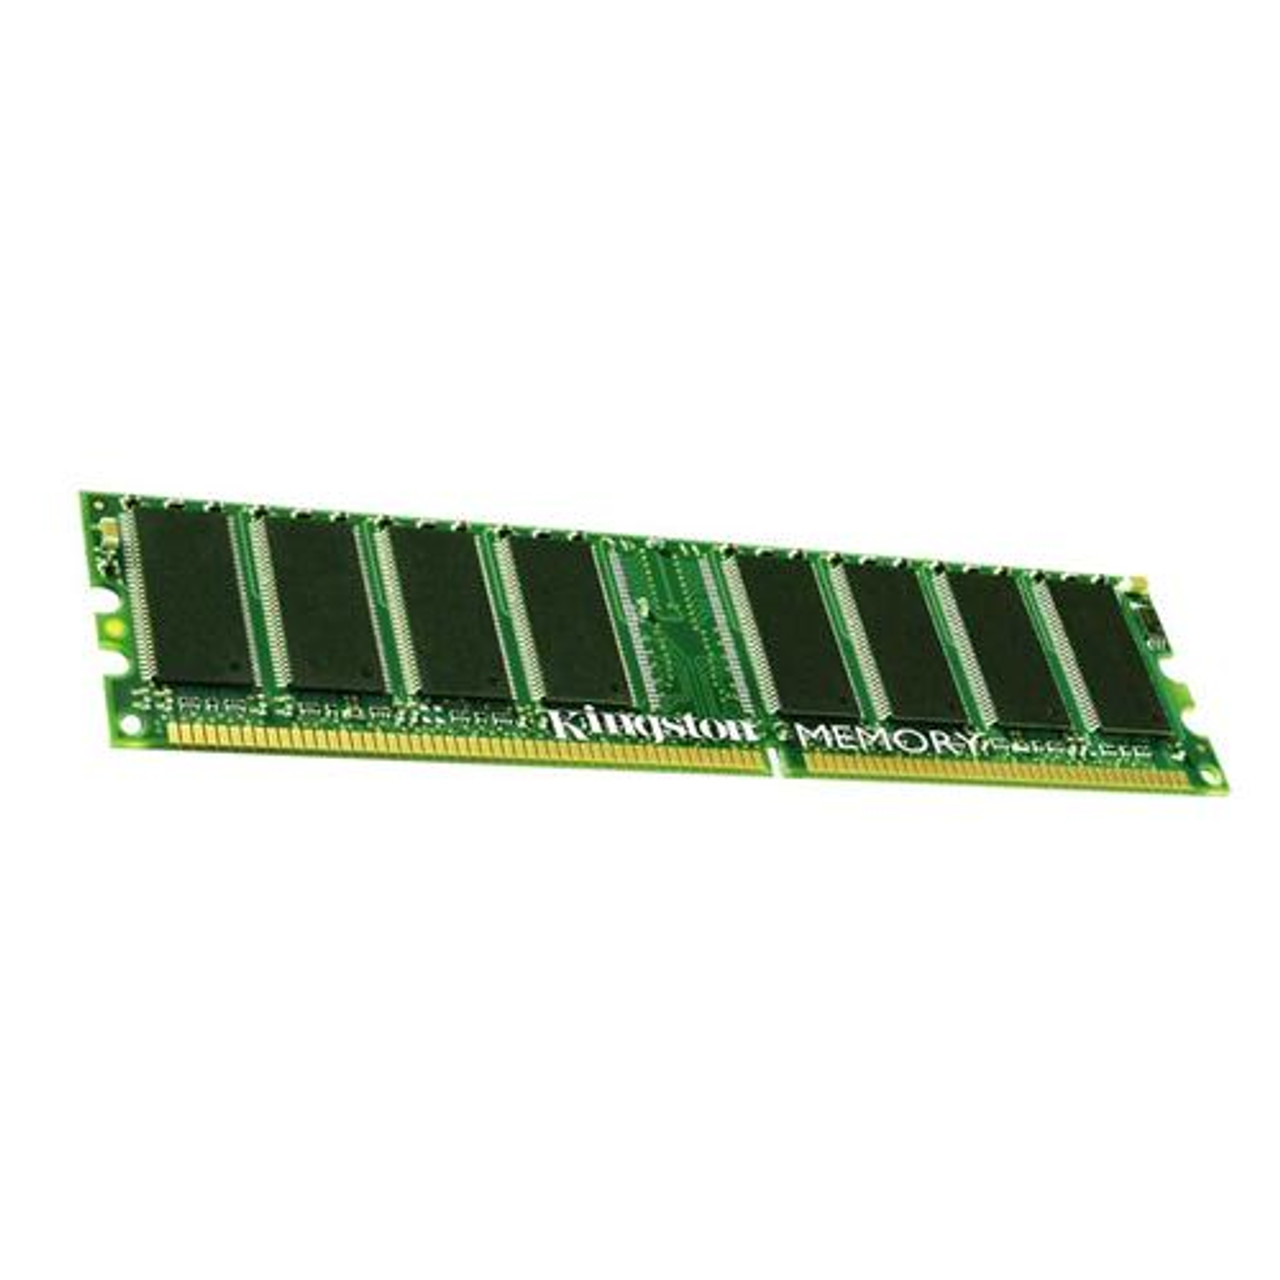 22-0010-001 Kingston 64MB PC133 133MHz ECC Unbuffered CL3 168-Pin DIMM Memory Module for Chaparral Network